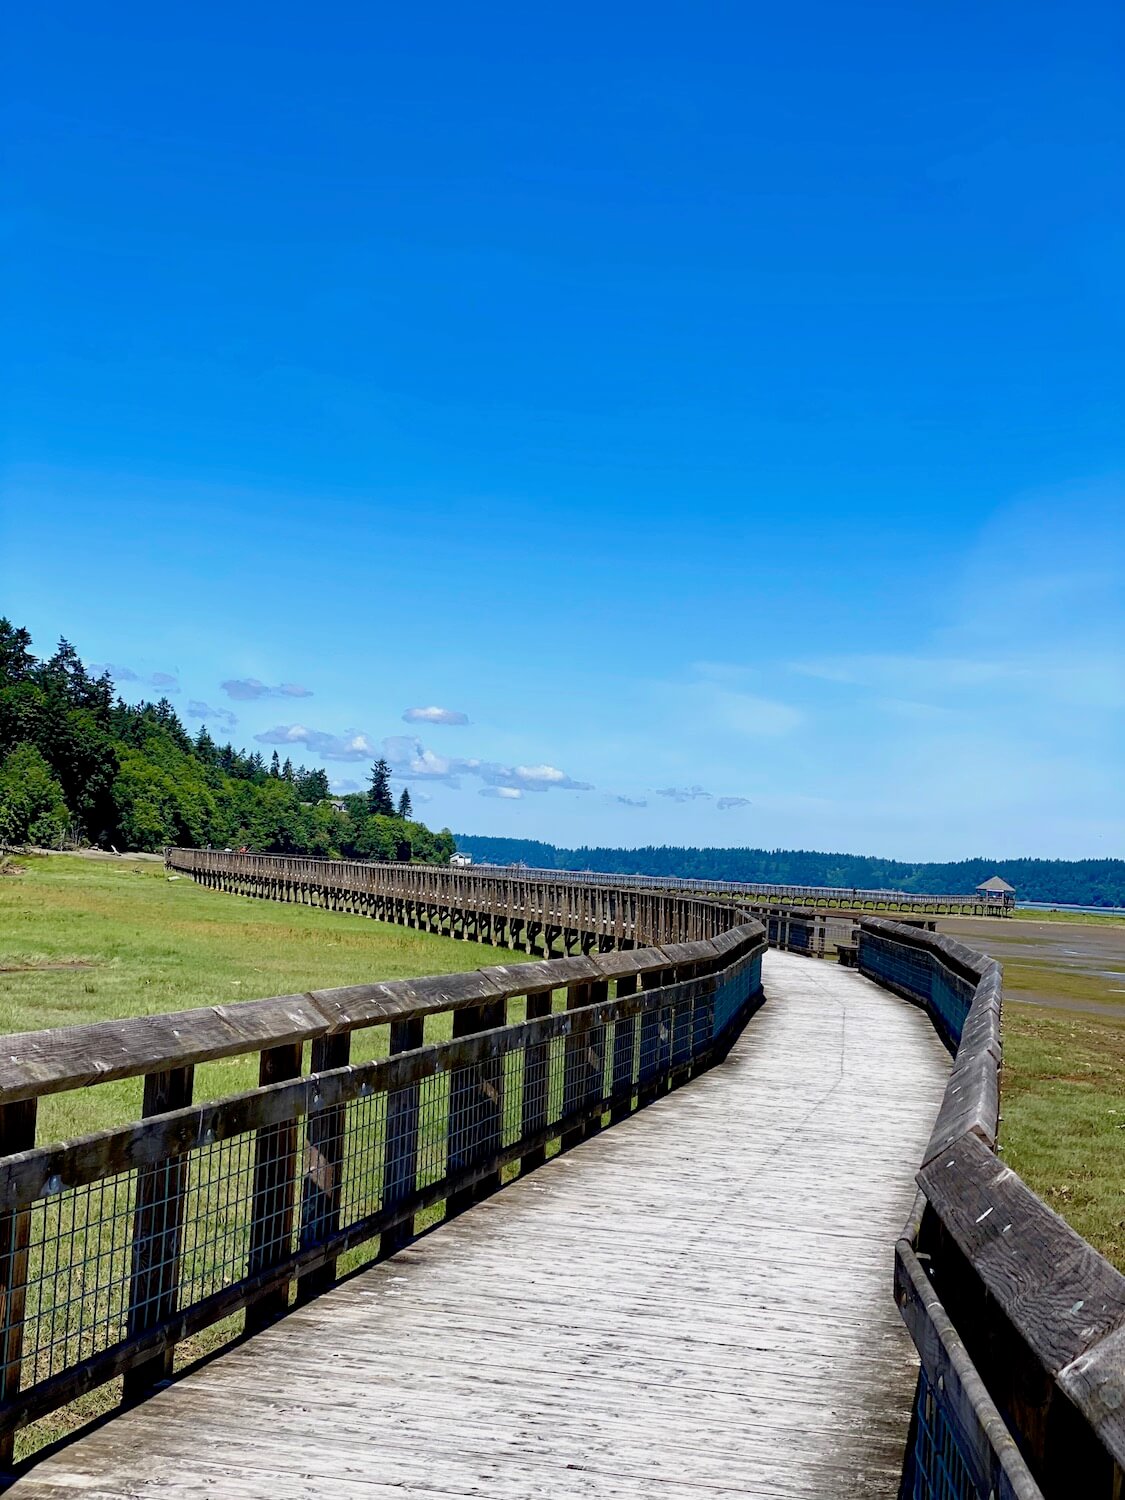 A winding boardwalk traverses the marsh land at Nisqually Wildlife Refuge. The tide is out and reveals large areas of green grasses and the gazebo way in the distance is very tiny compared the the wide blue sky.